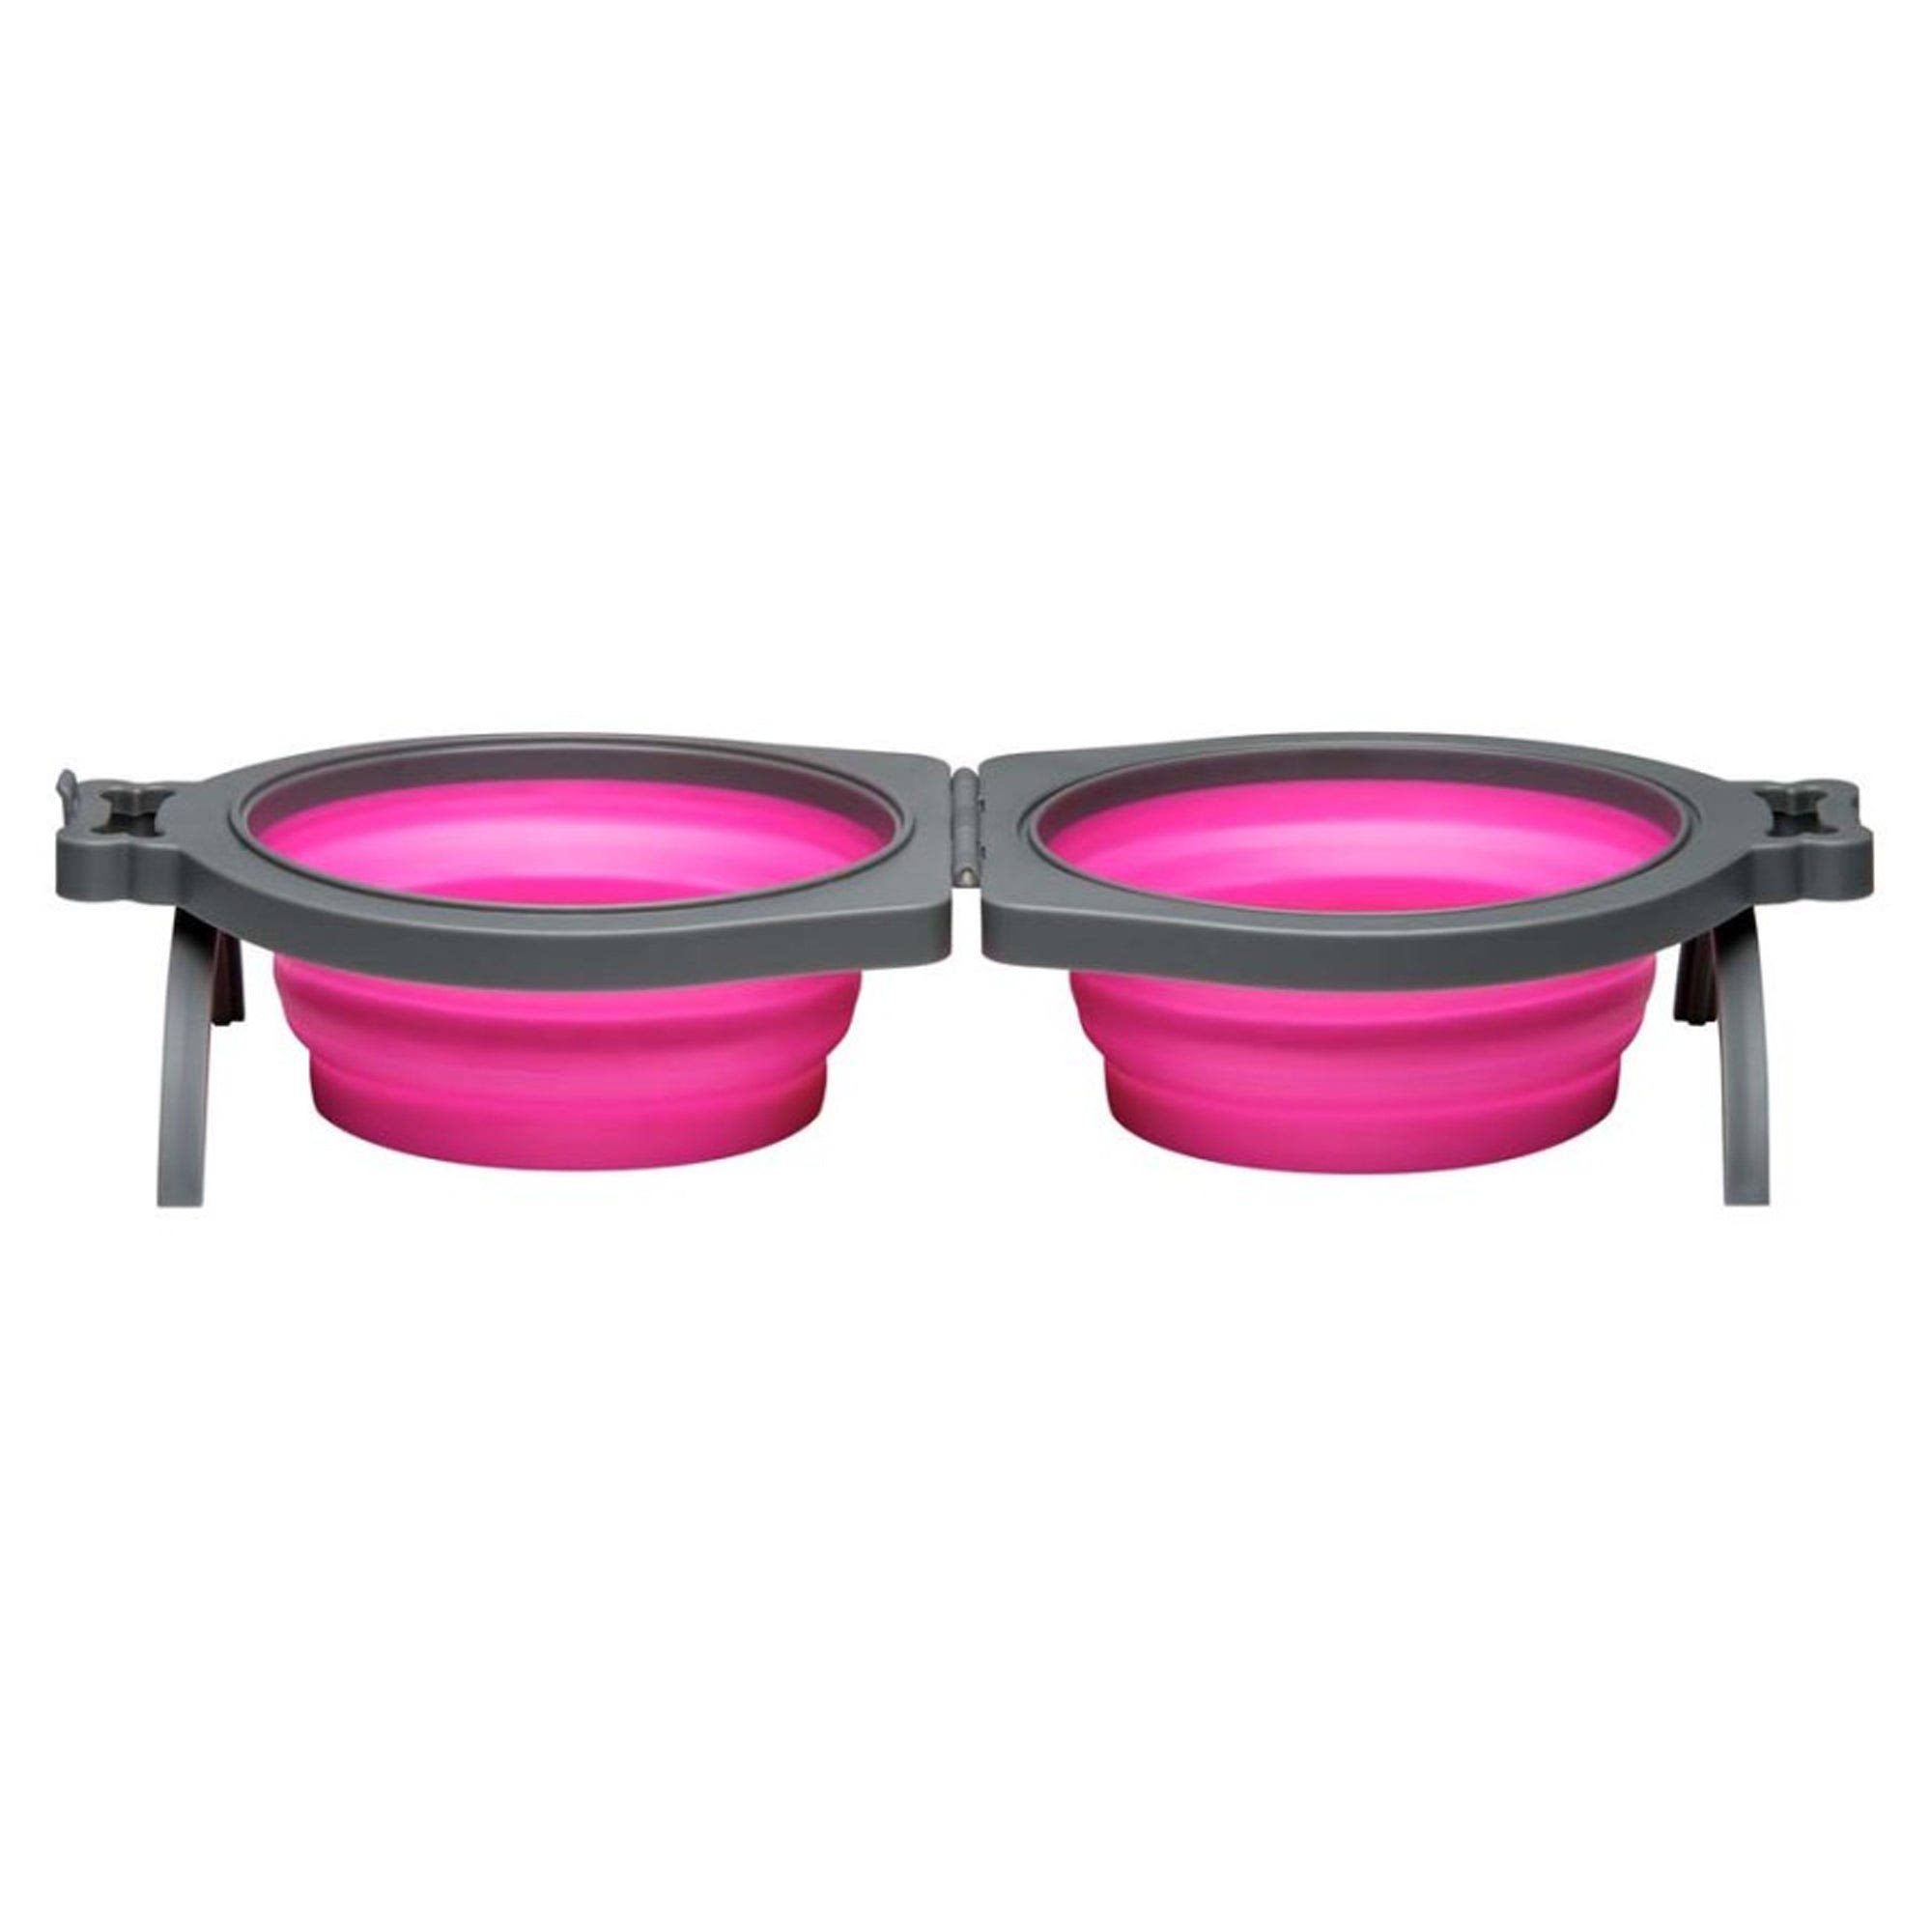 Loving Pets Bella Roma Travel Double Diner Bowl, Pink, Small